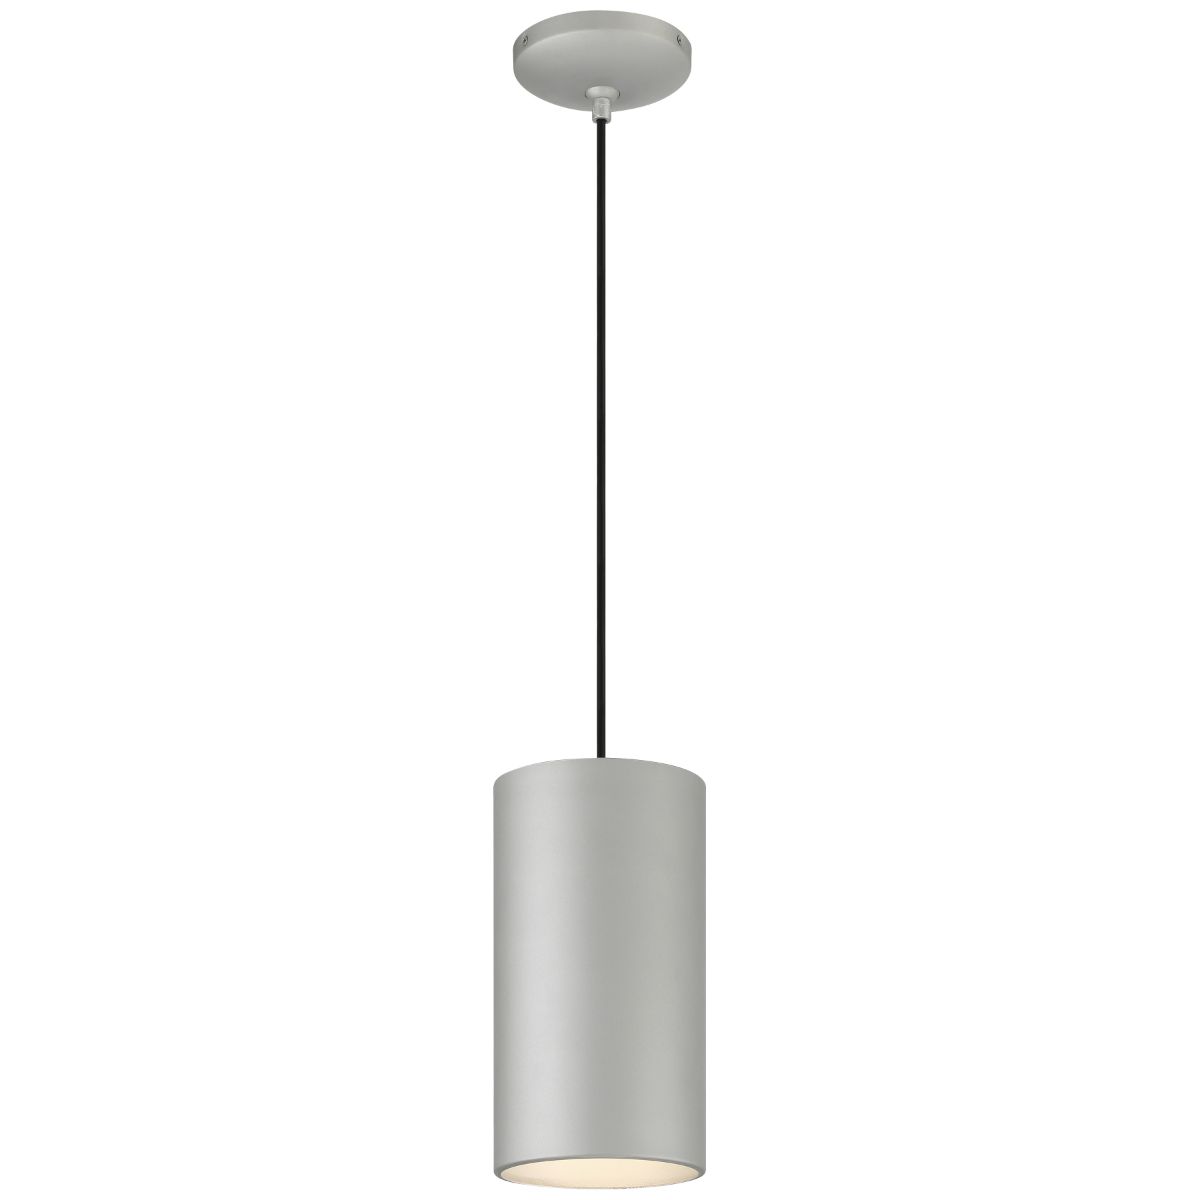 Pilson XL 11 in. Pendant Light with Cord